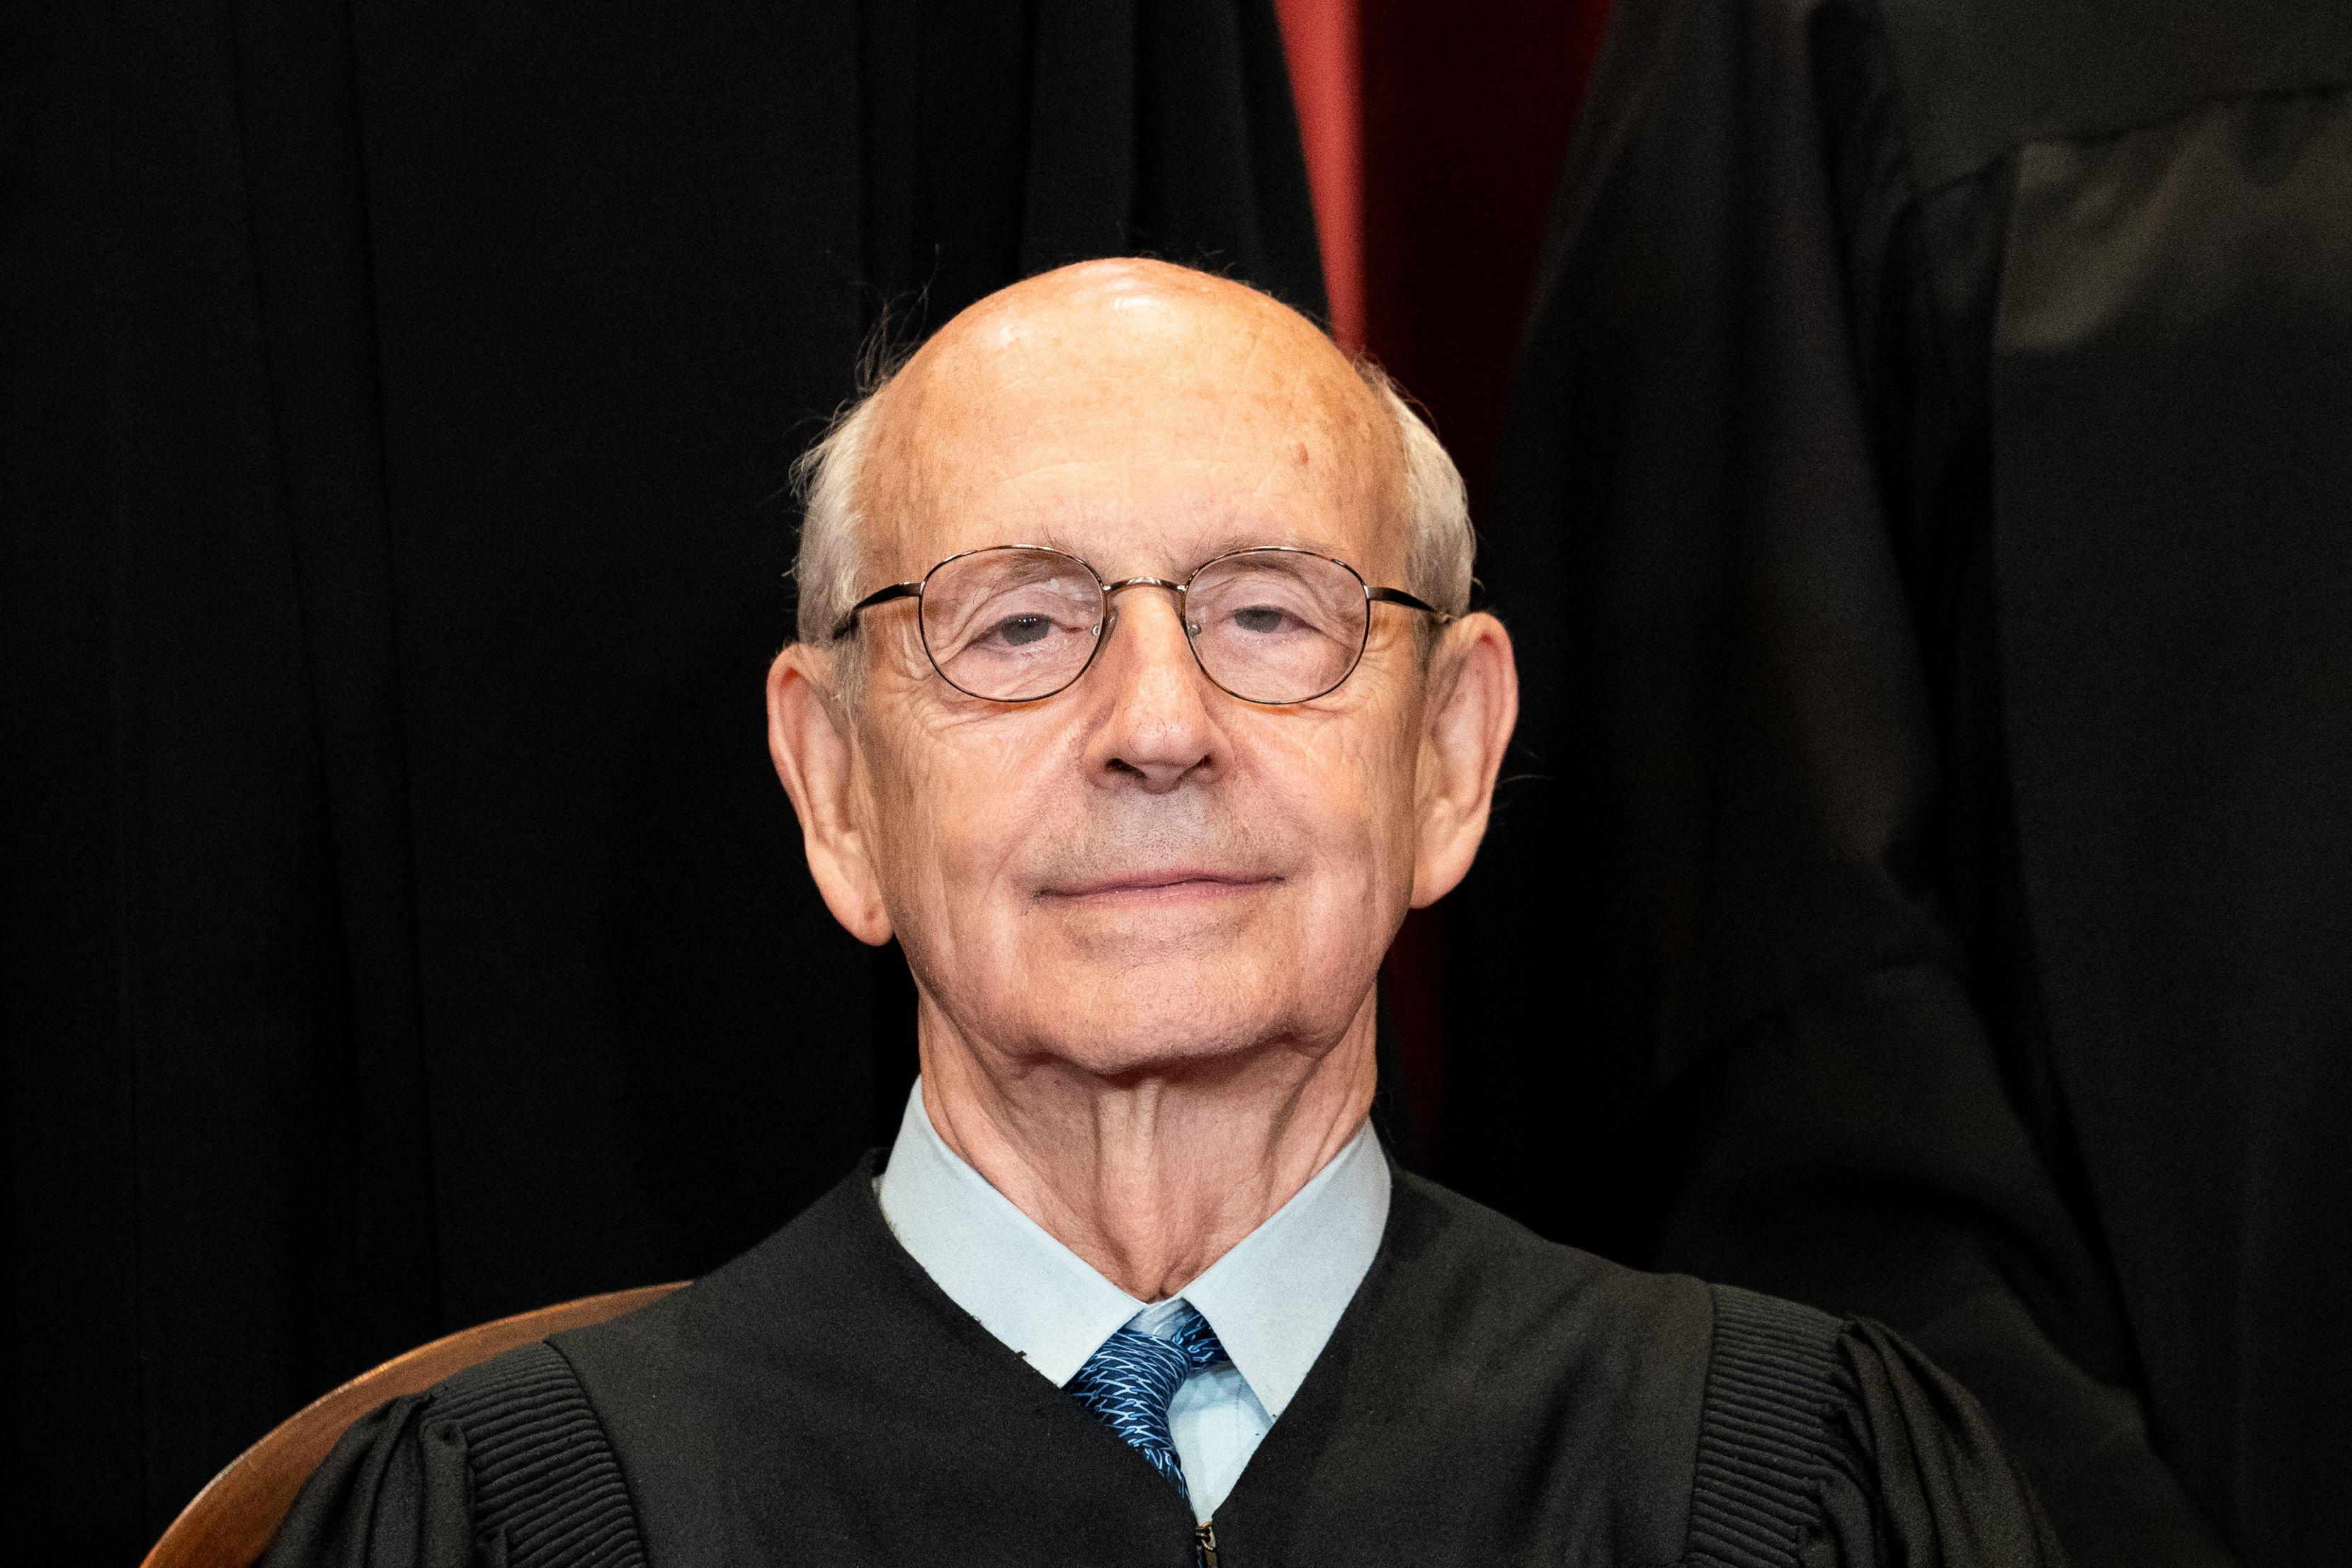 Associate Justice Stephen Breyer wears his robes and sits during a group photo session of the Justices at the Supreme Court in Washington, D.C., on April 23, 2021.